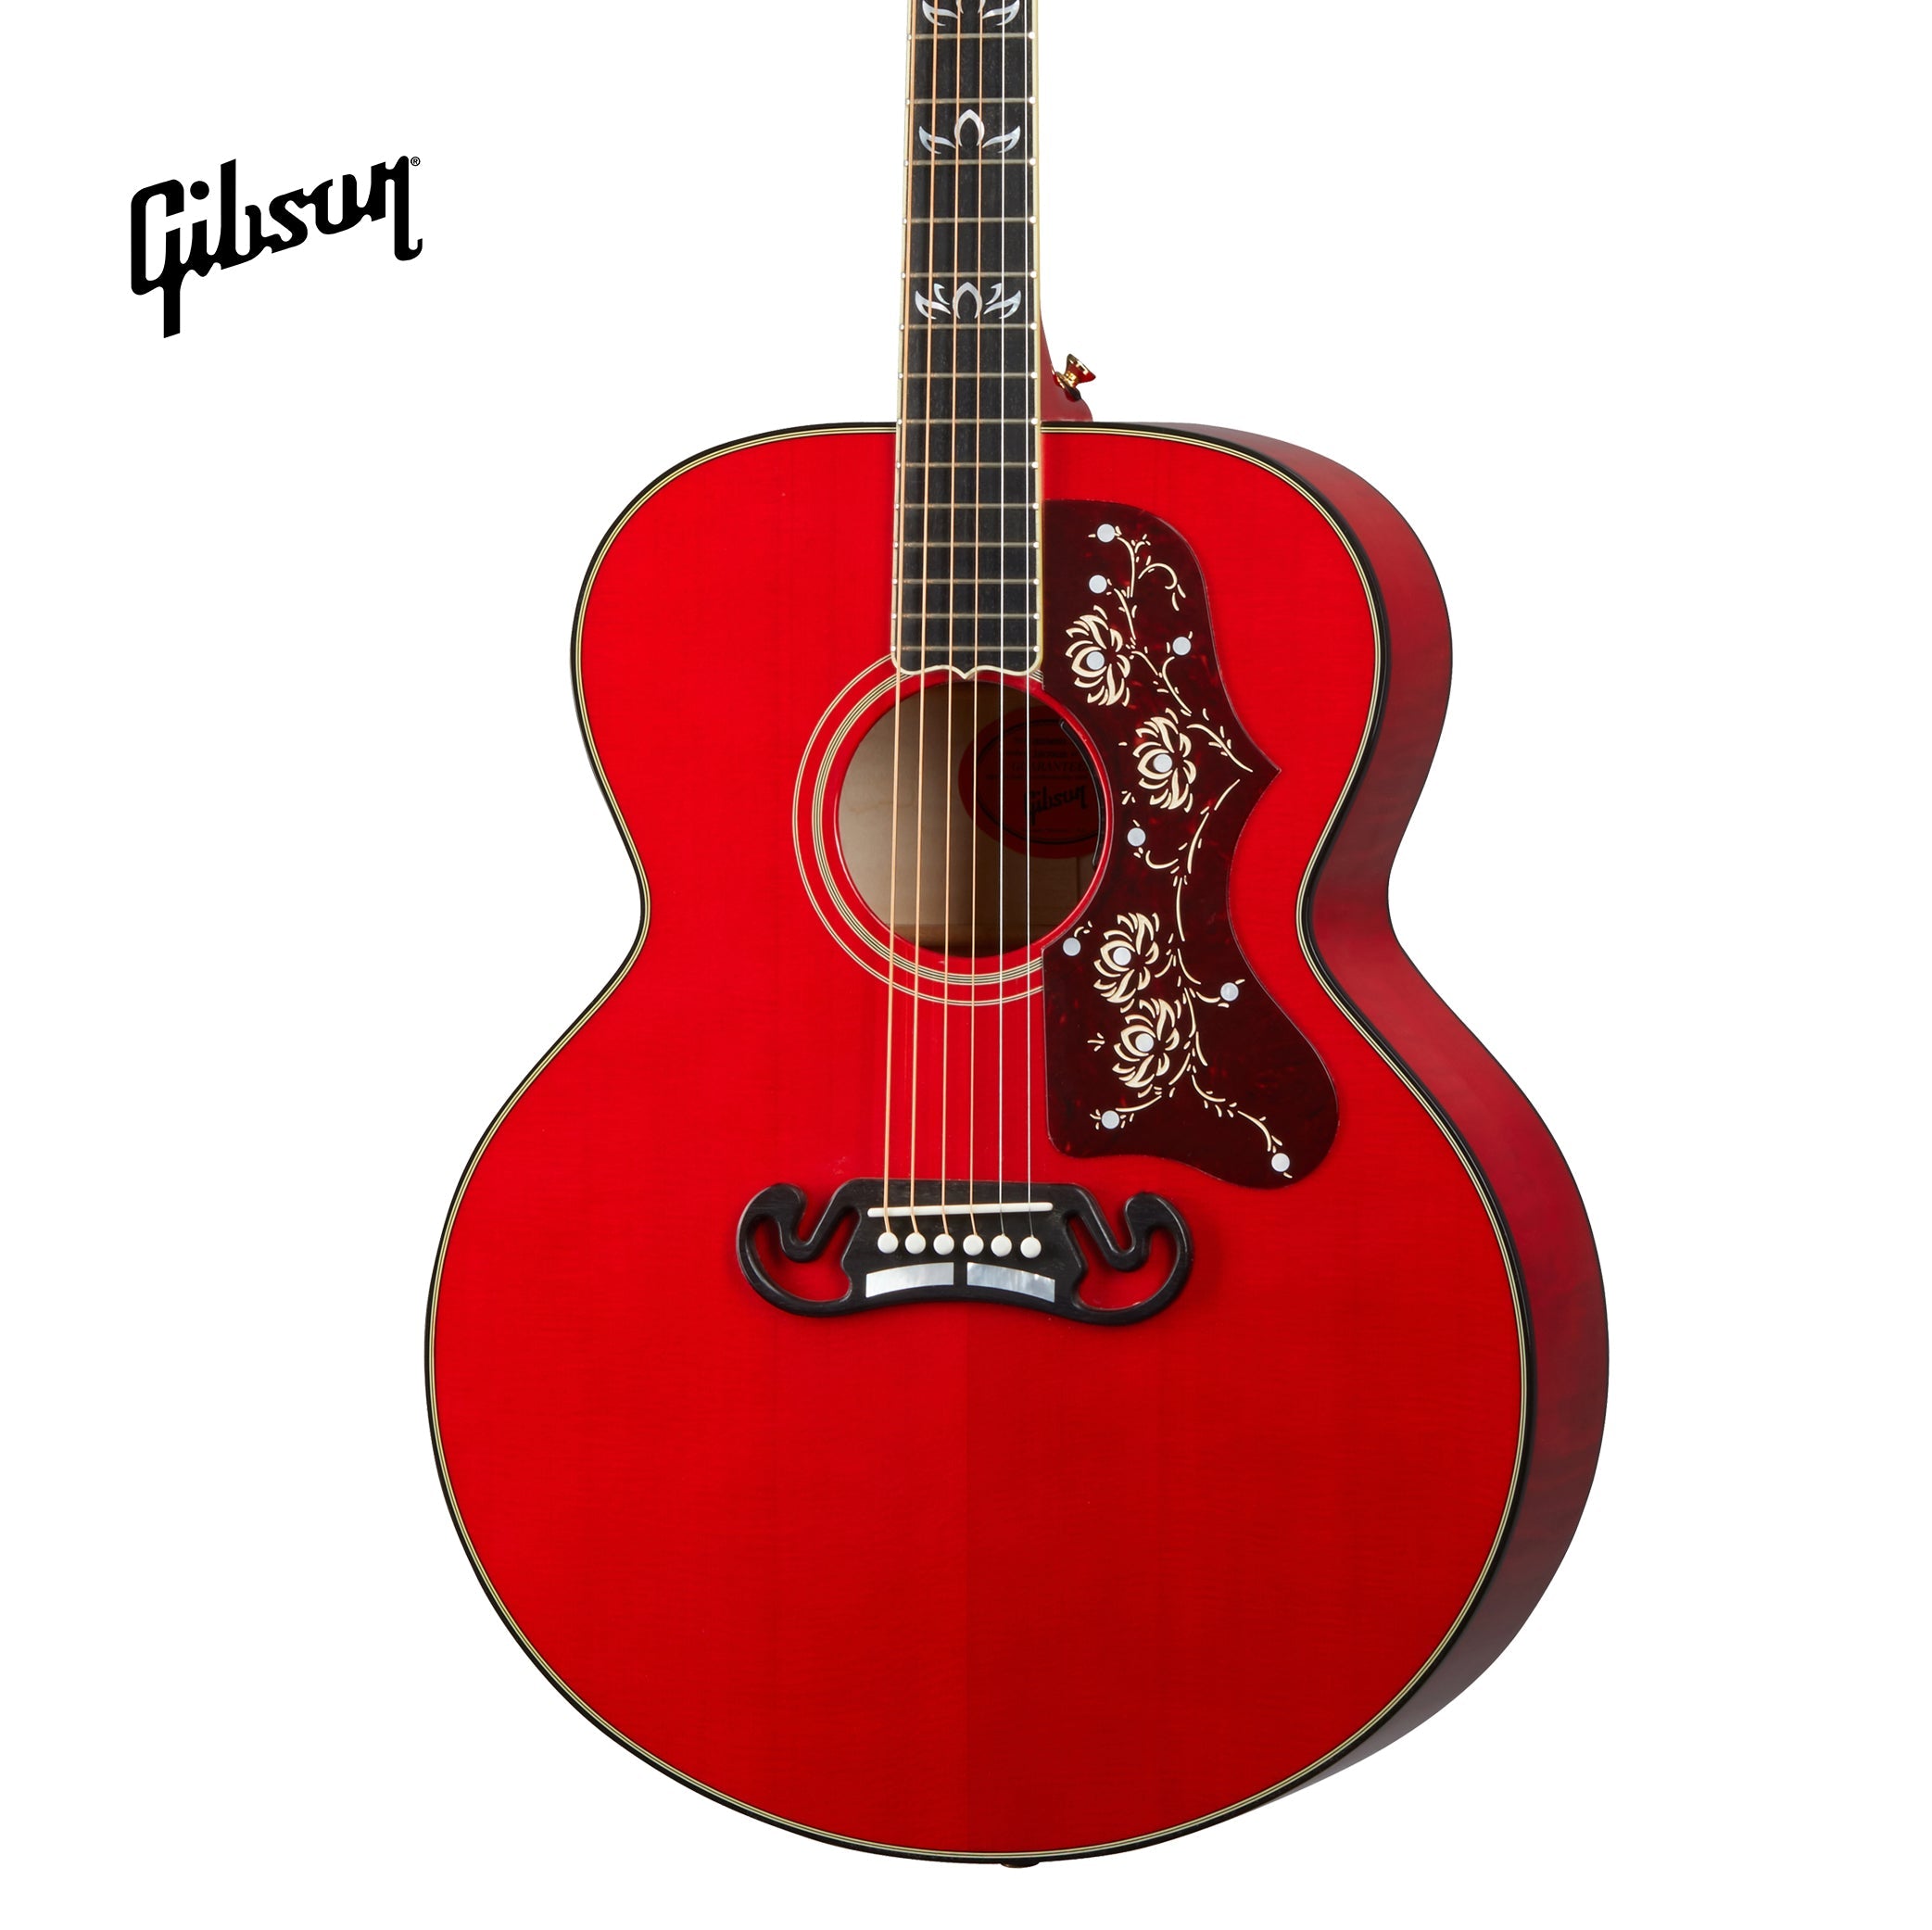 GIBSON ORIANTHI SJ-200 ACOUSTIC-ELECTRIC GUITAR - CHERRY